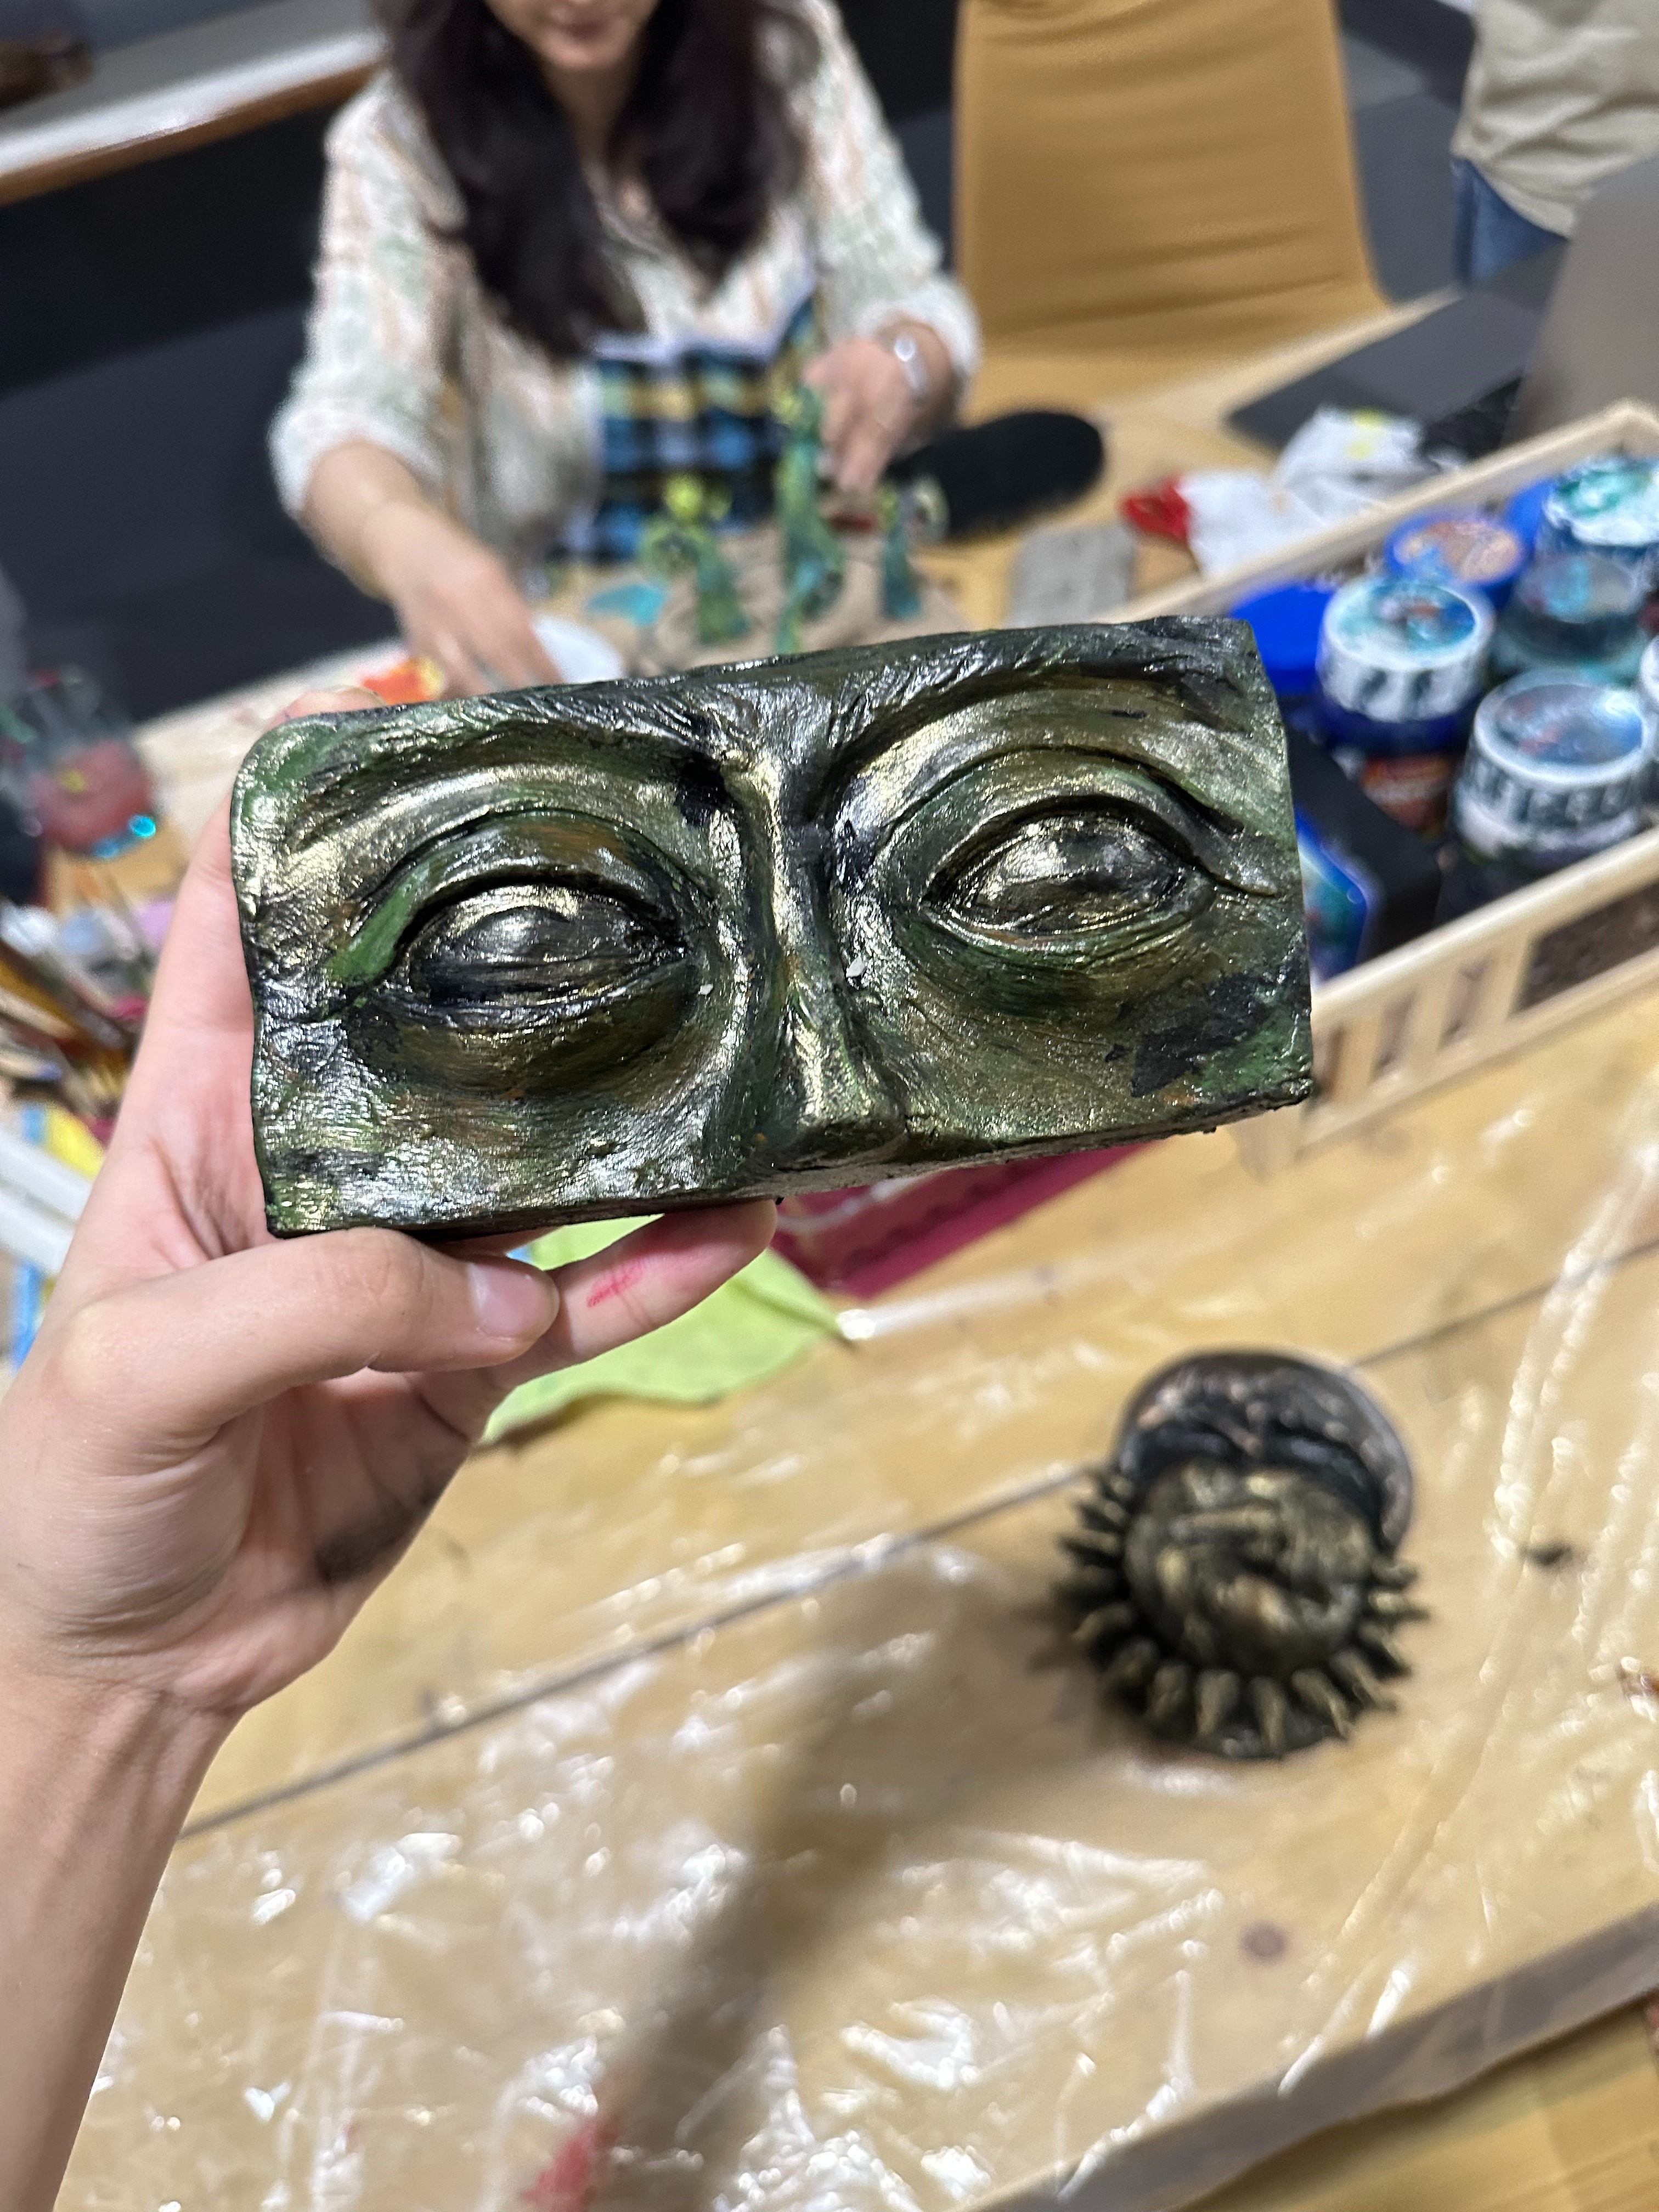 Photo of a painted sculpture made by a participant of the Clay Sculpting Workshop.